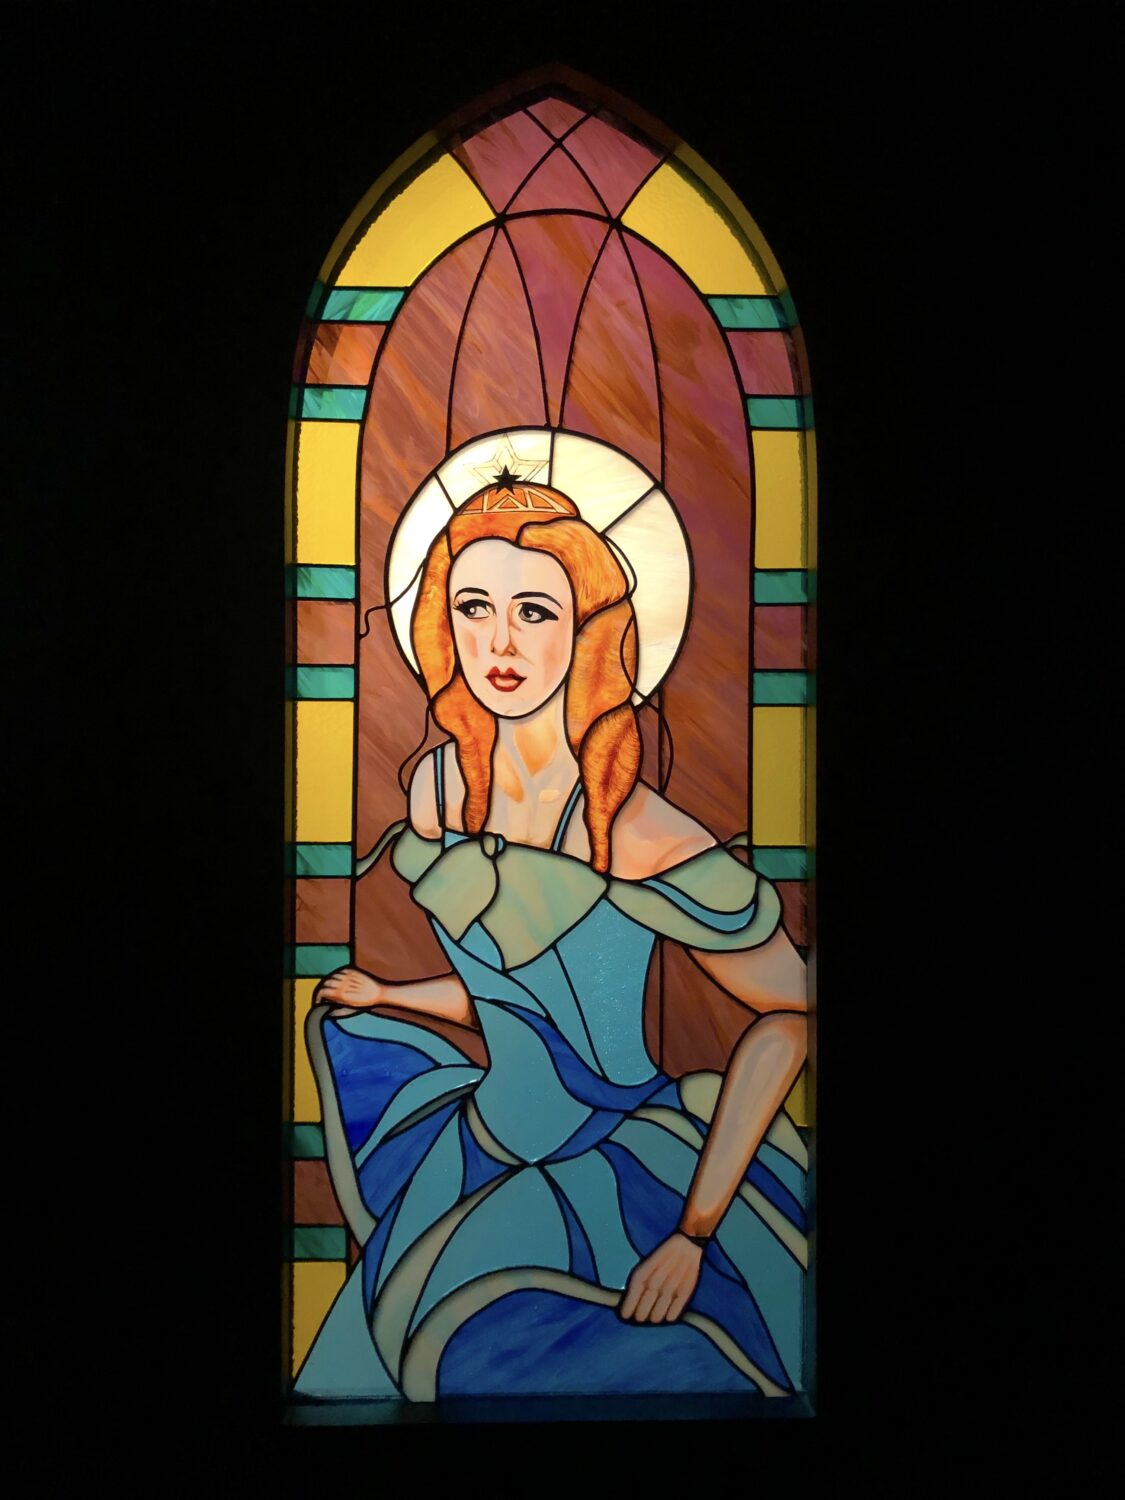 Mary Vivian Pearce stained glass by Amanda Maccagnan at the Academy Museum Photo by Shana Nys Dambrot